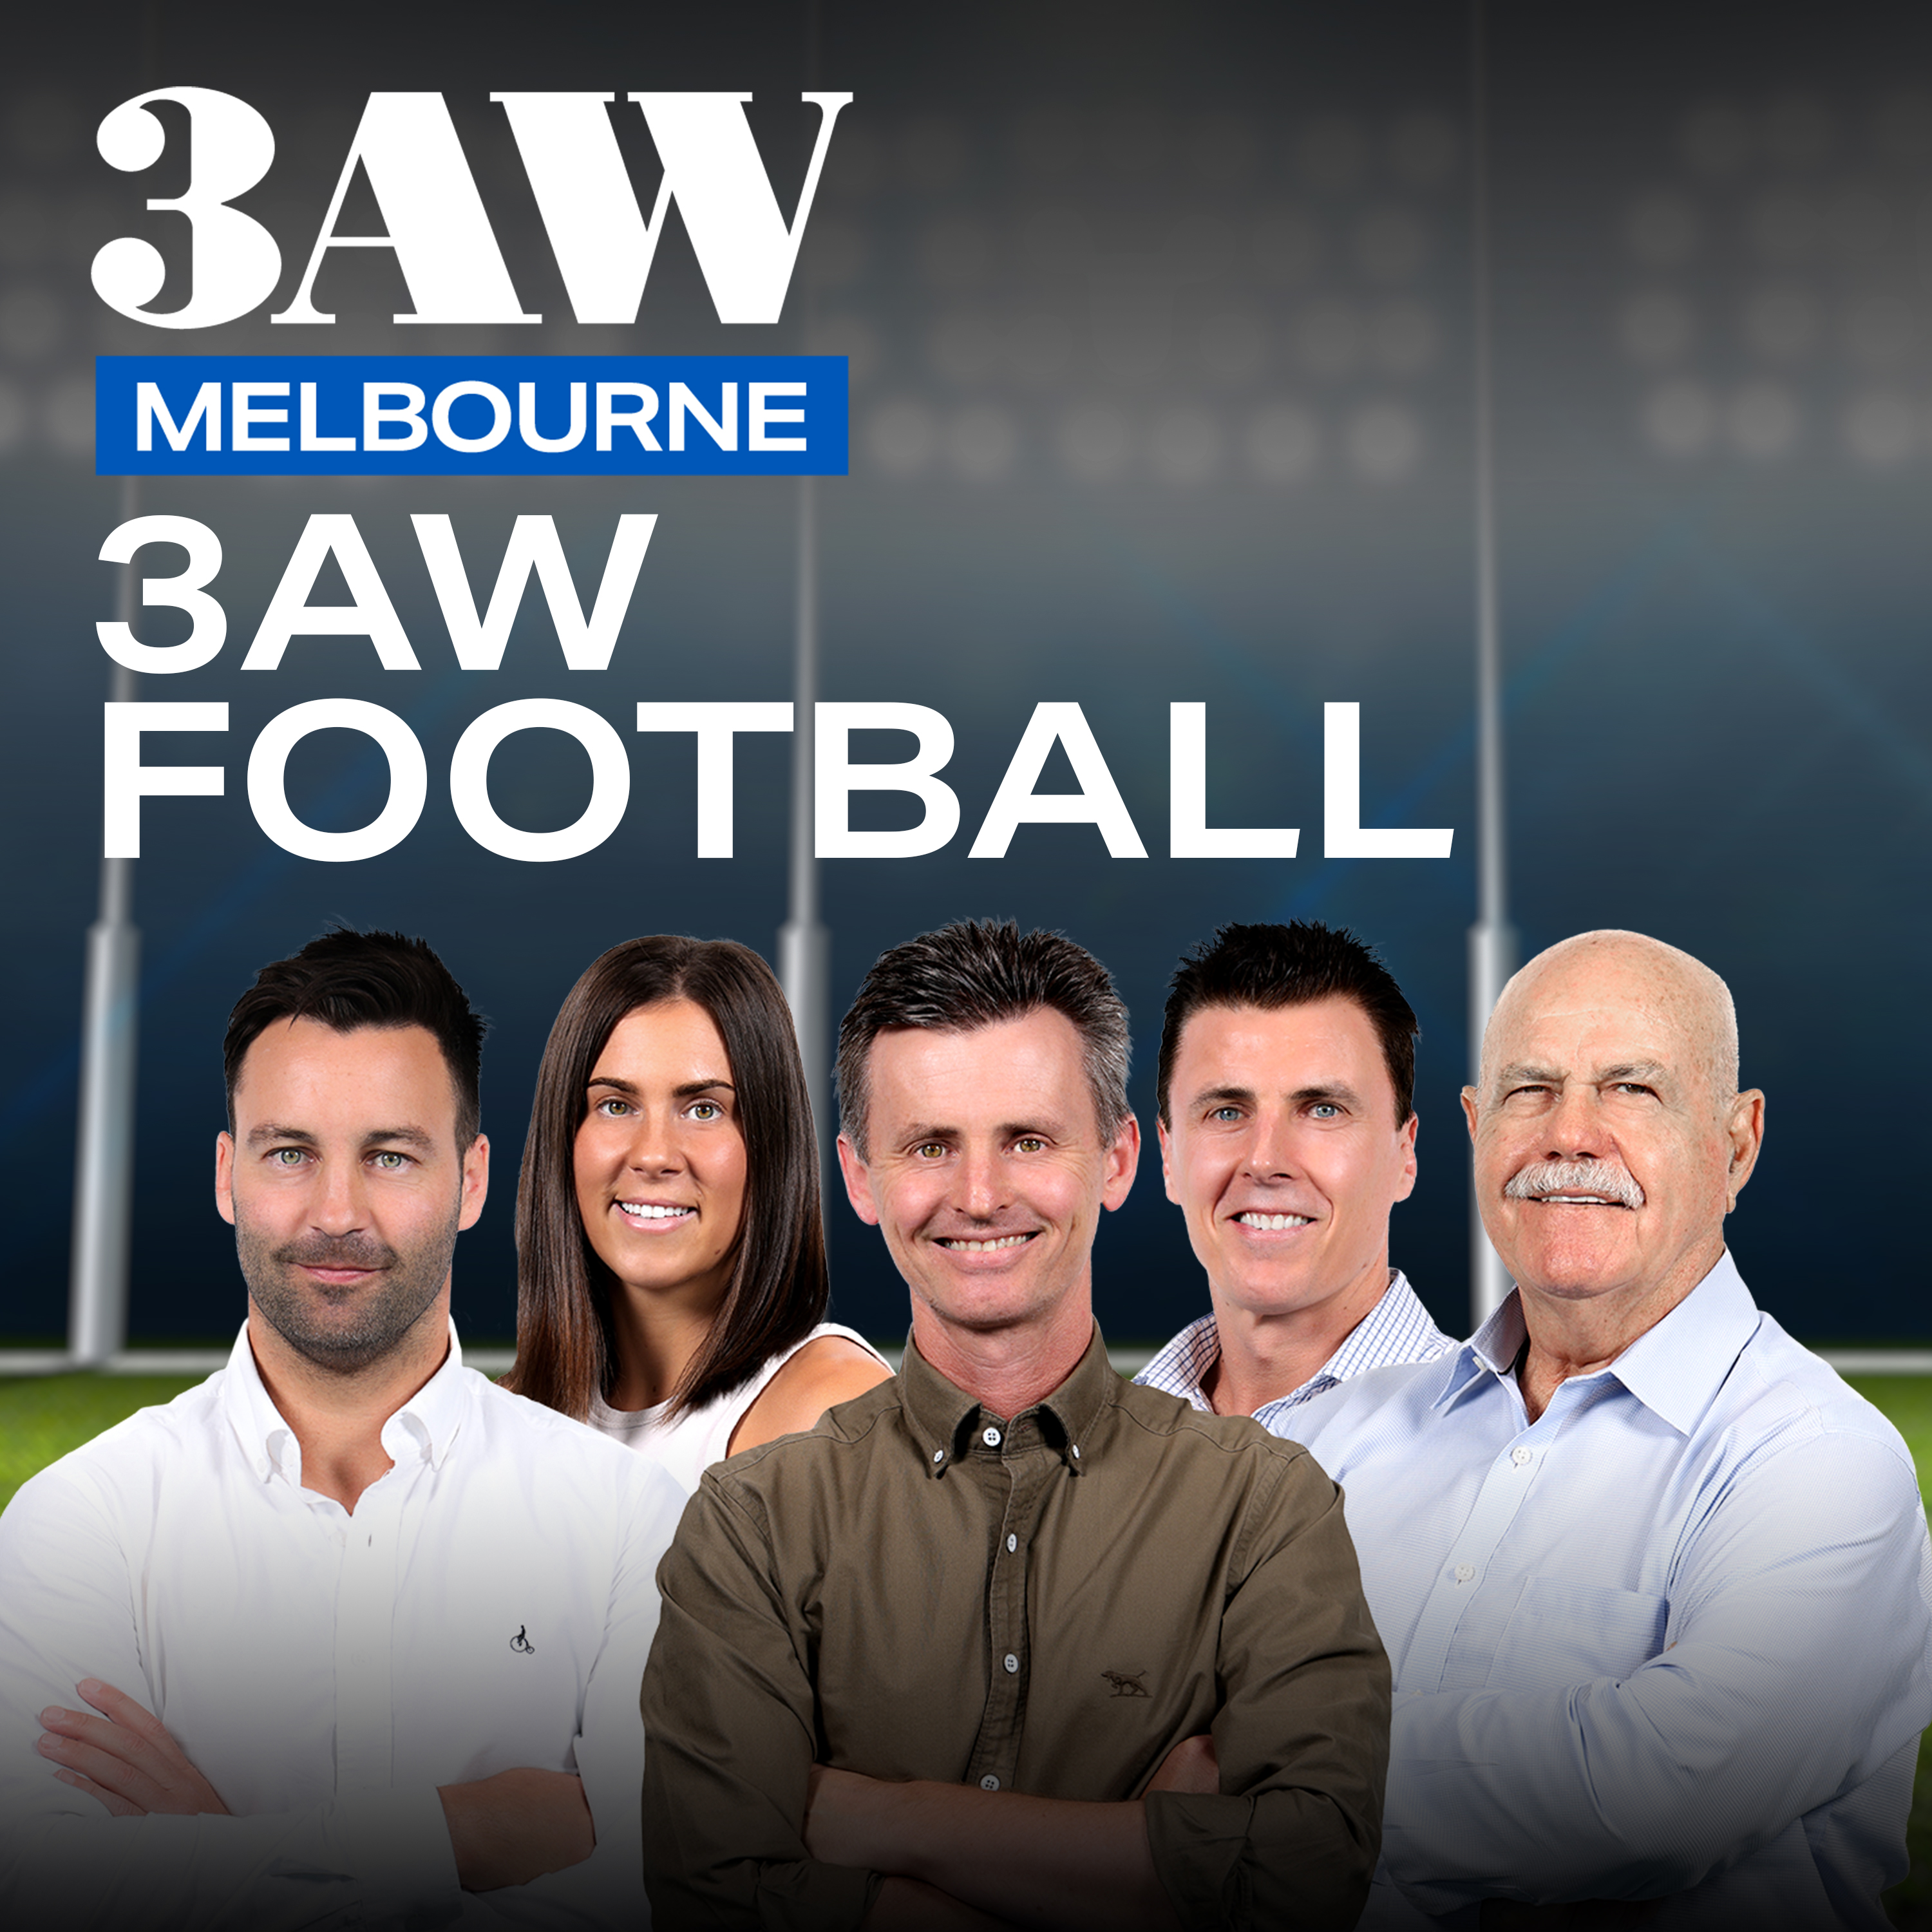 THE VOTES! Tony Shaw's best players on Sunday football (North Melbourne vs Hawthorn)